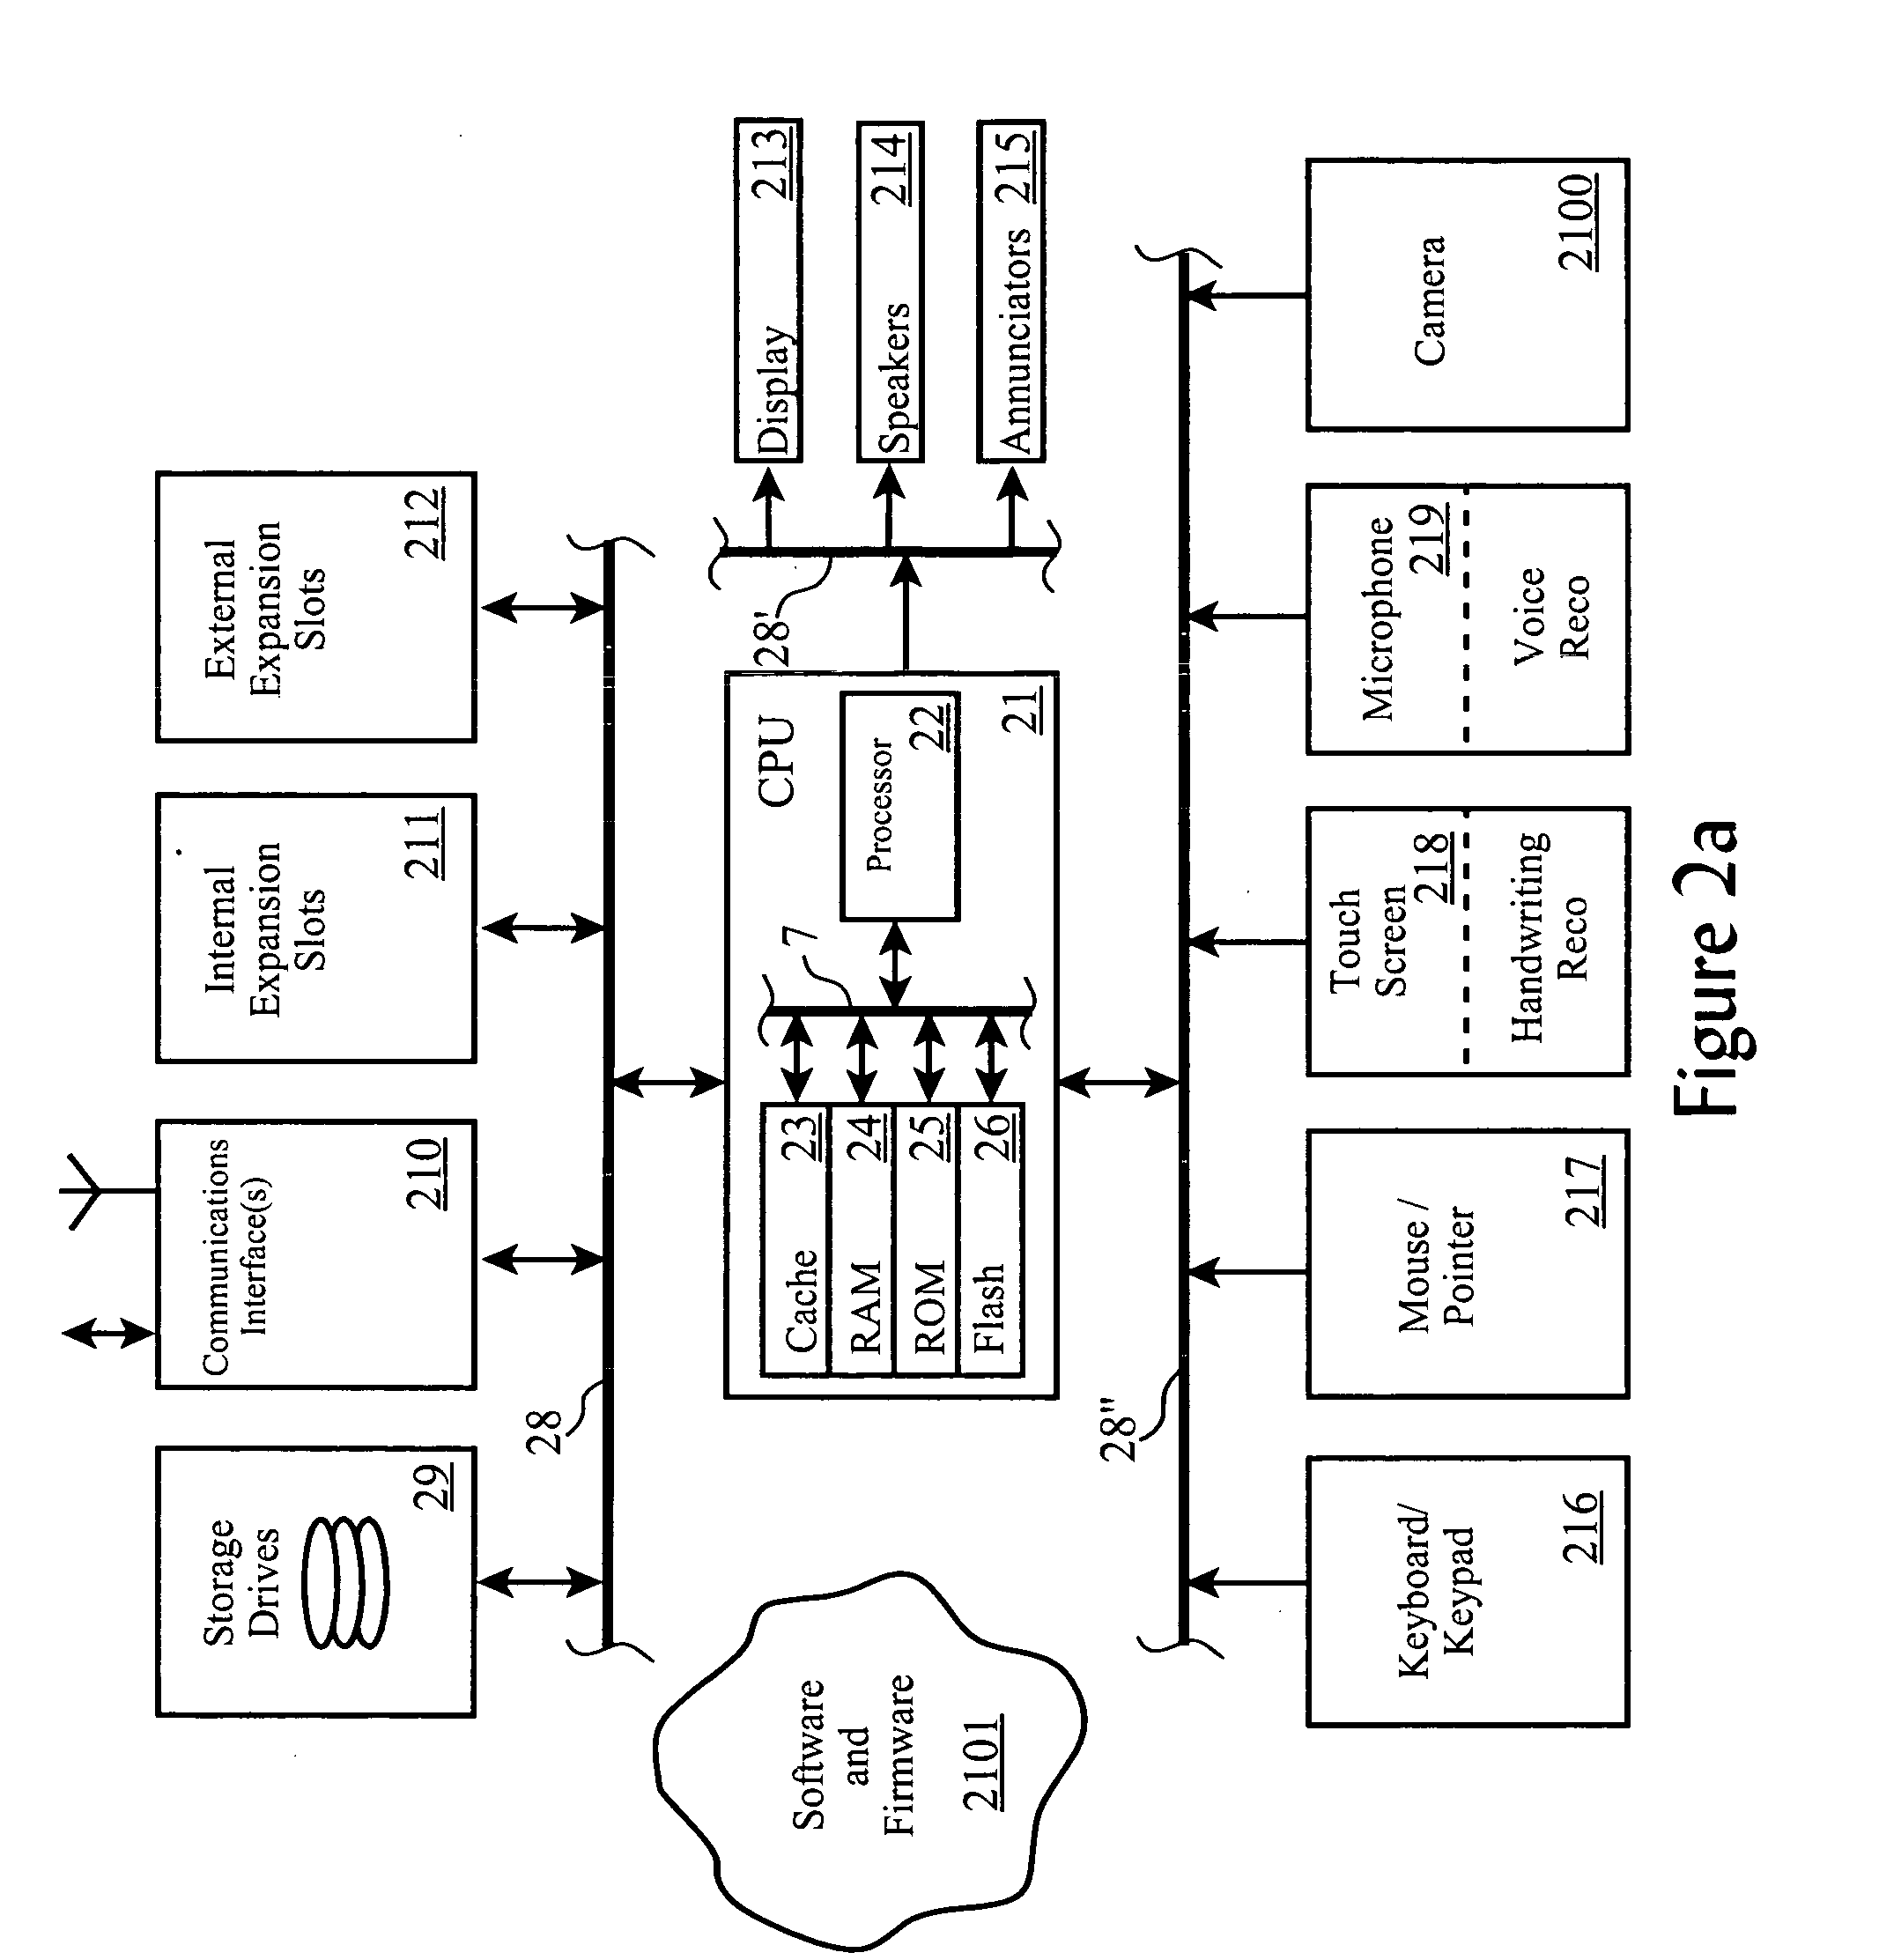 System for automatic wireless utilization of cellular telephone devices